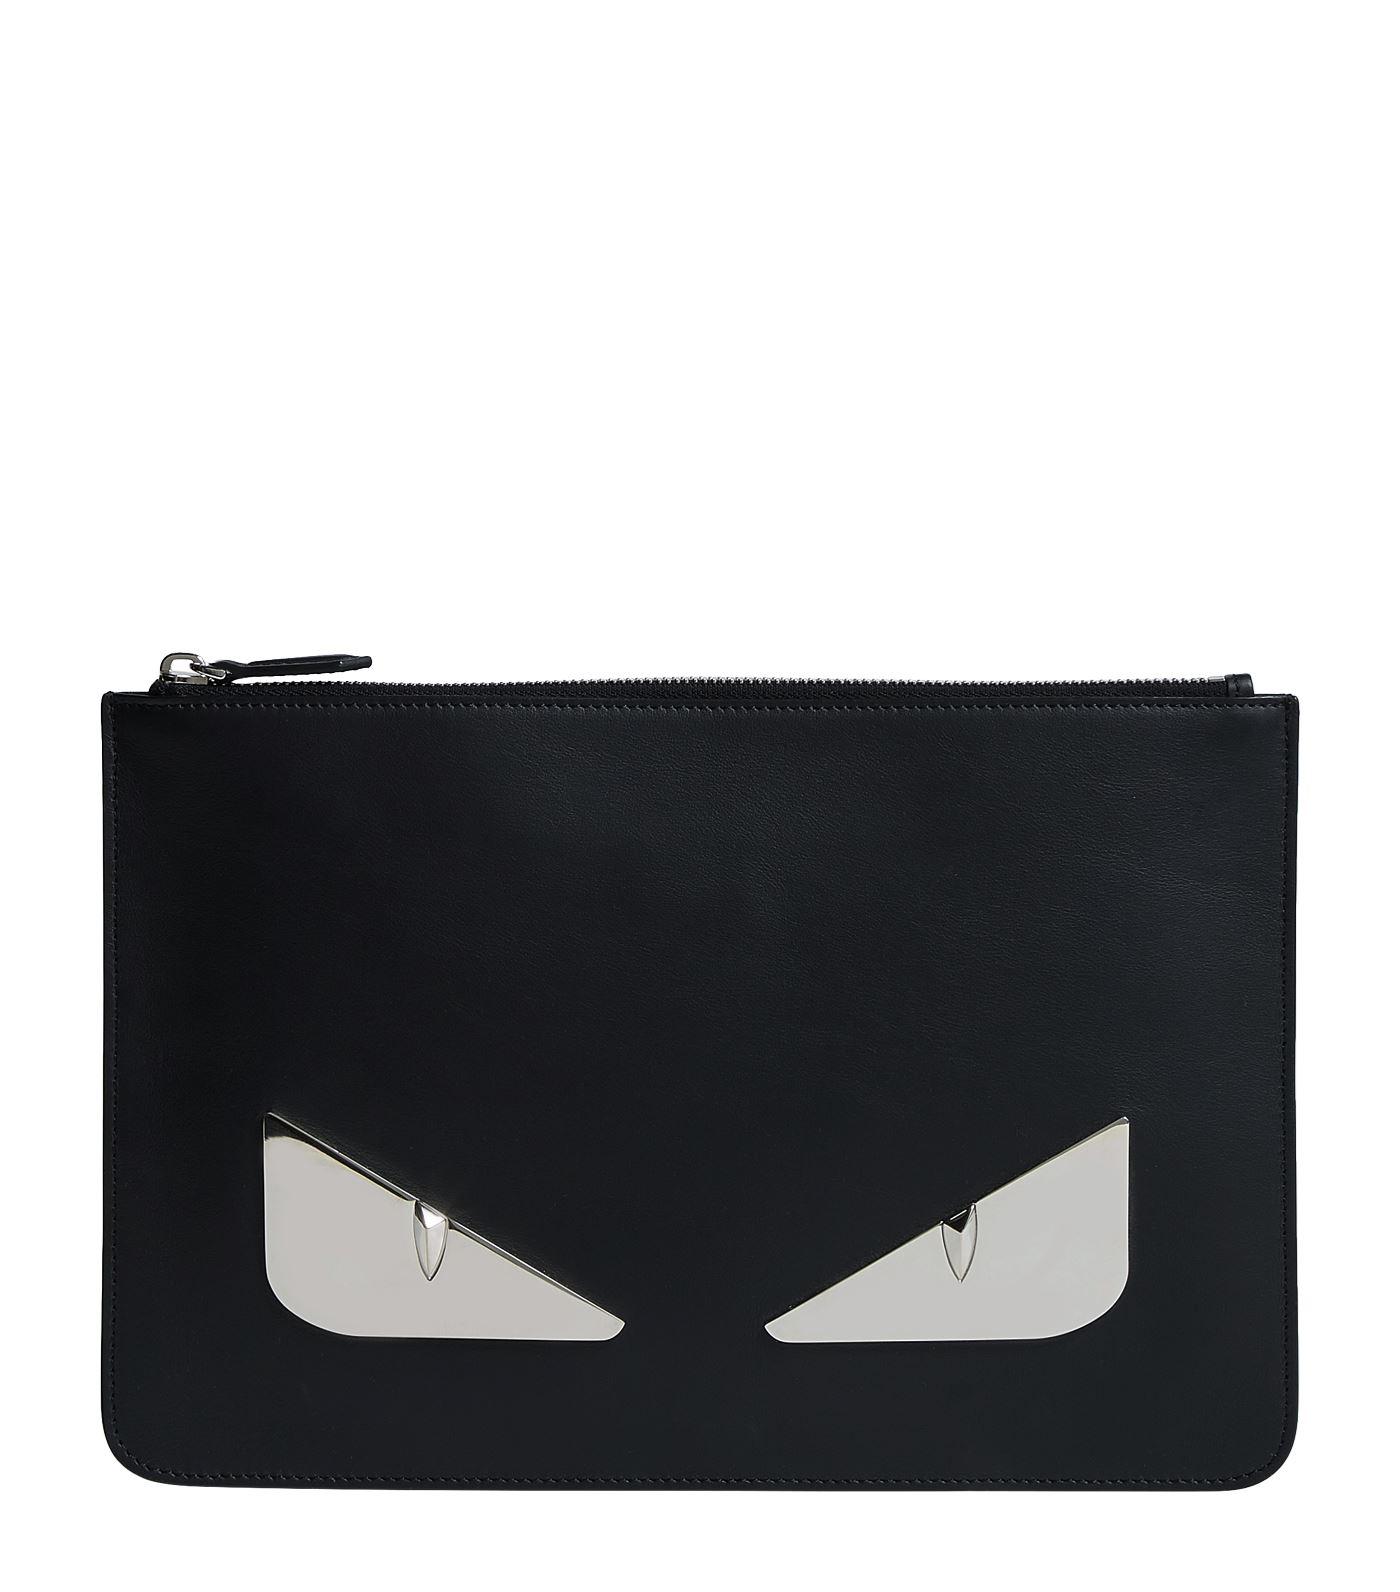 Fendi Leather Bag Bugs Pouch in Black for Men - Save 5% - Lyst